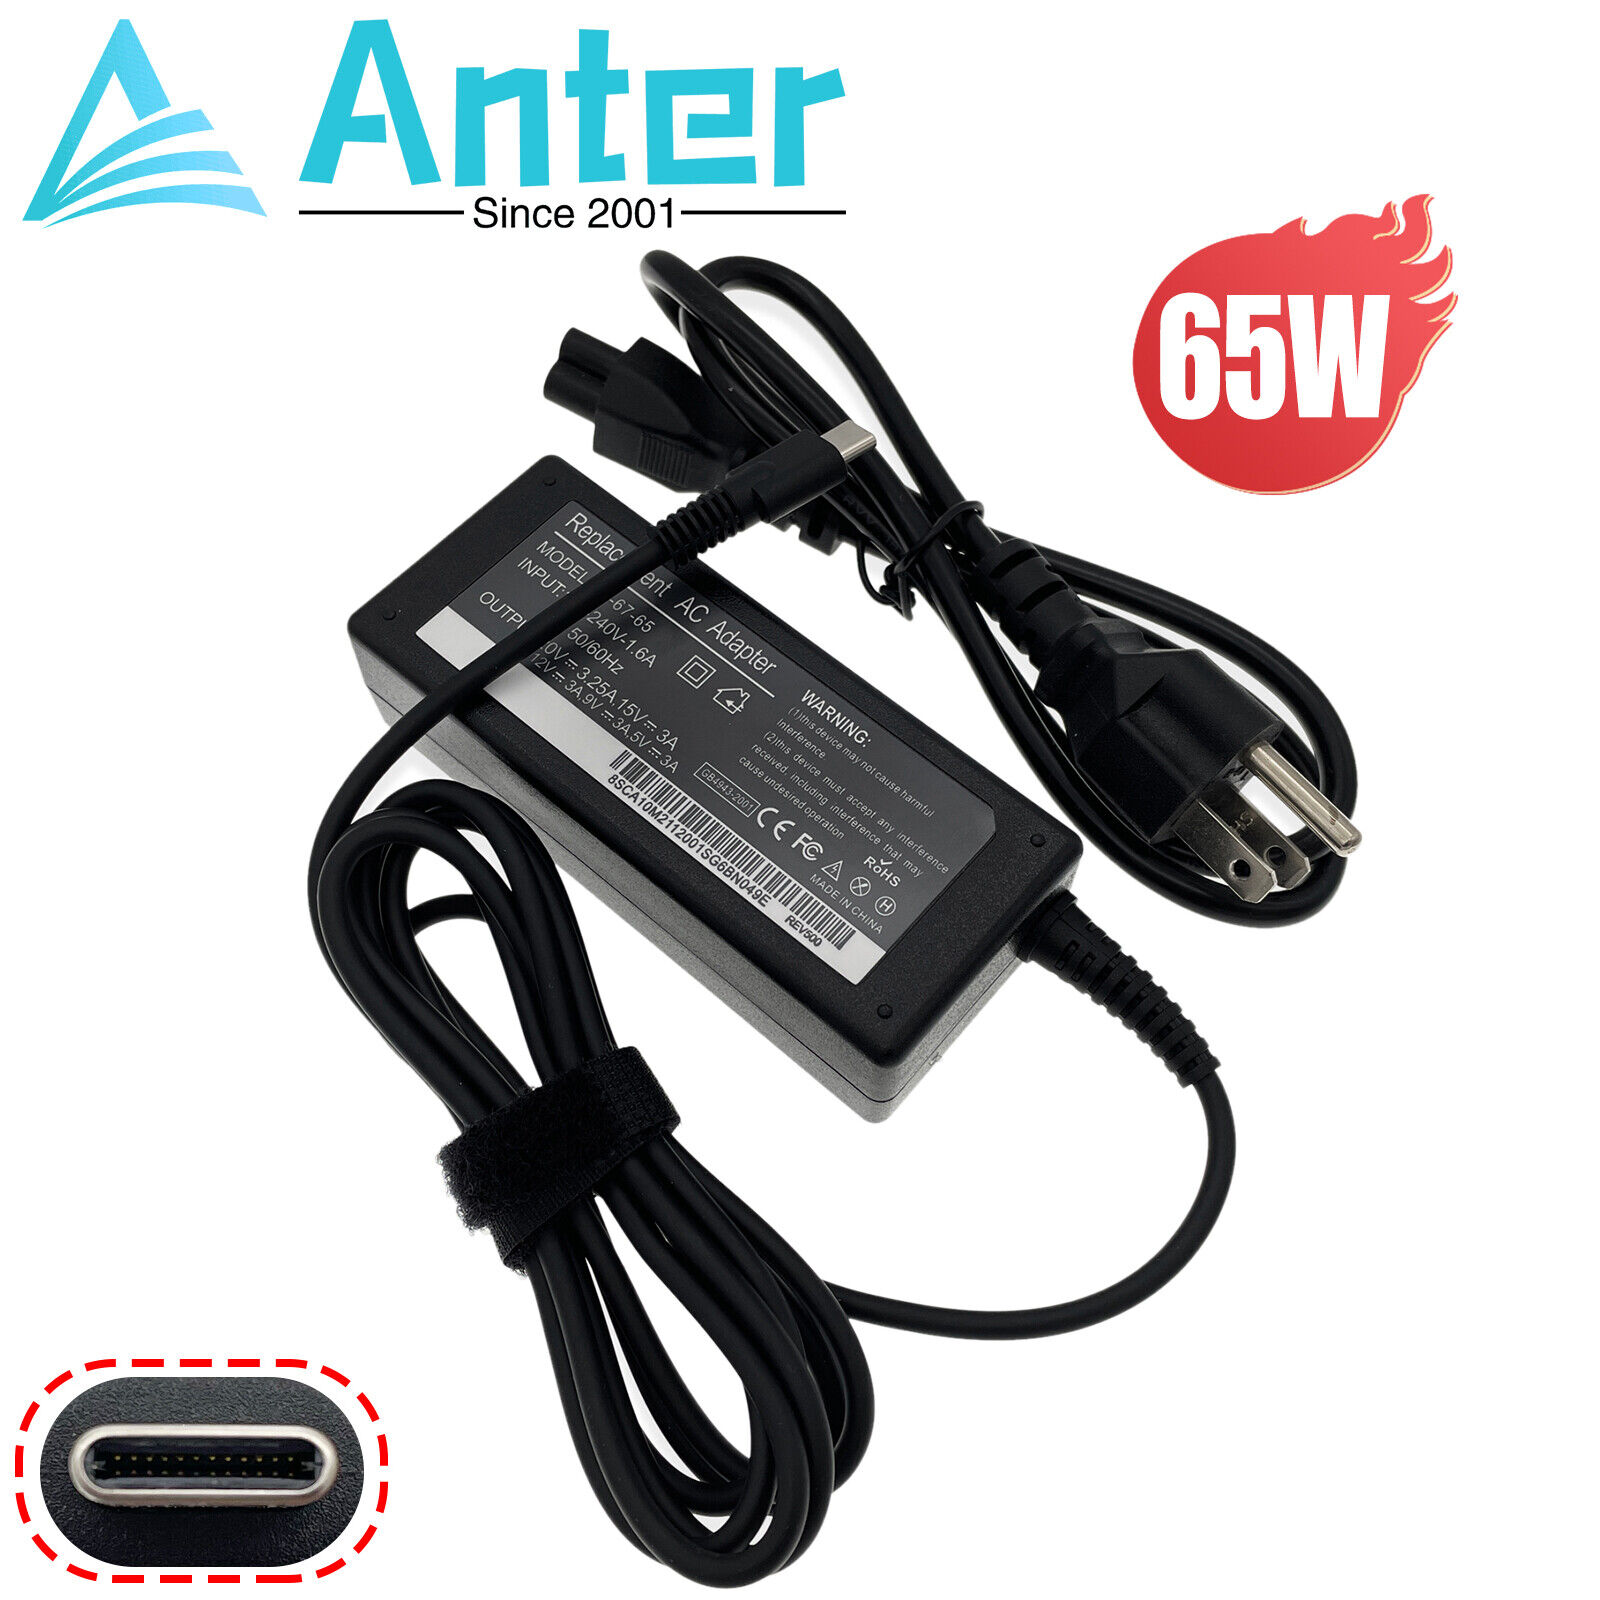 USB-C AC Adapter Charger For Lenovo ThinkPad L380 Yoga Type 20M7 20M8 Power Cord